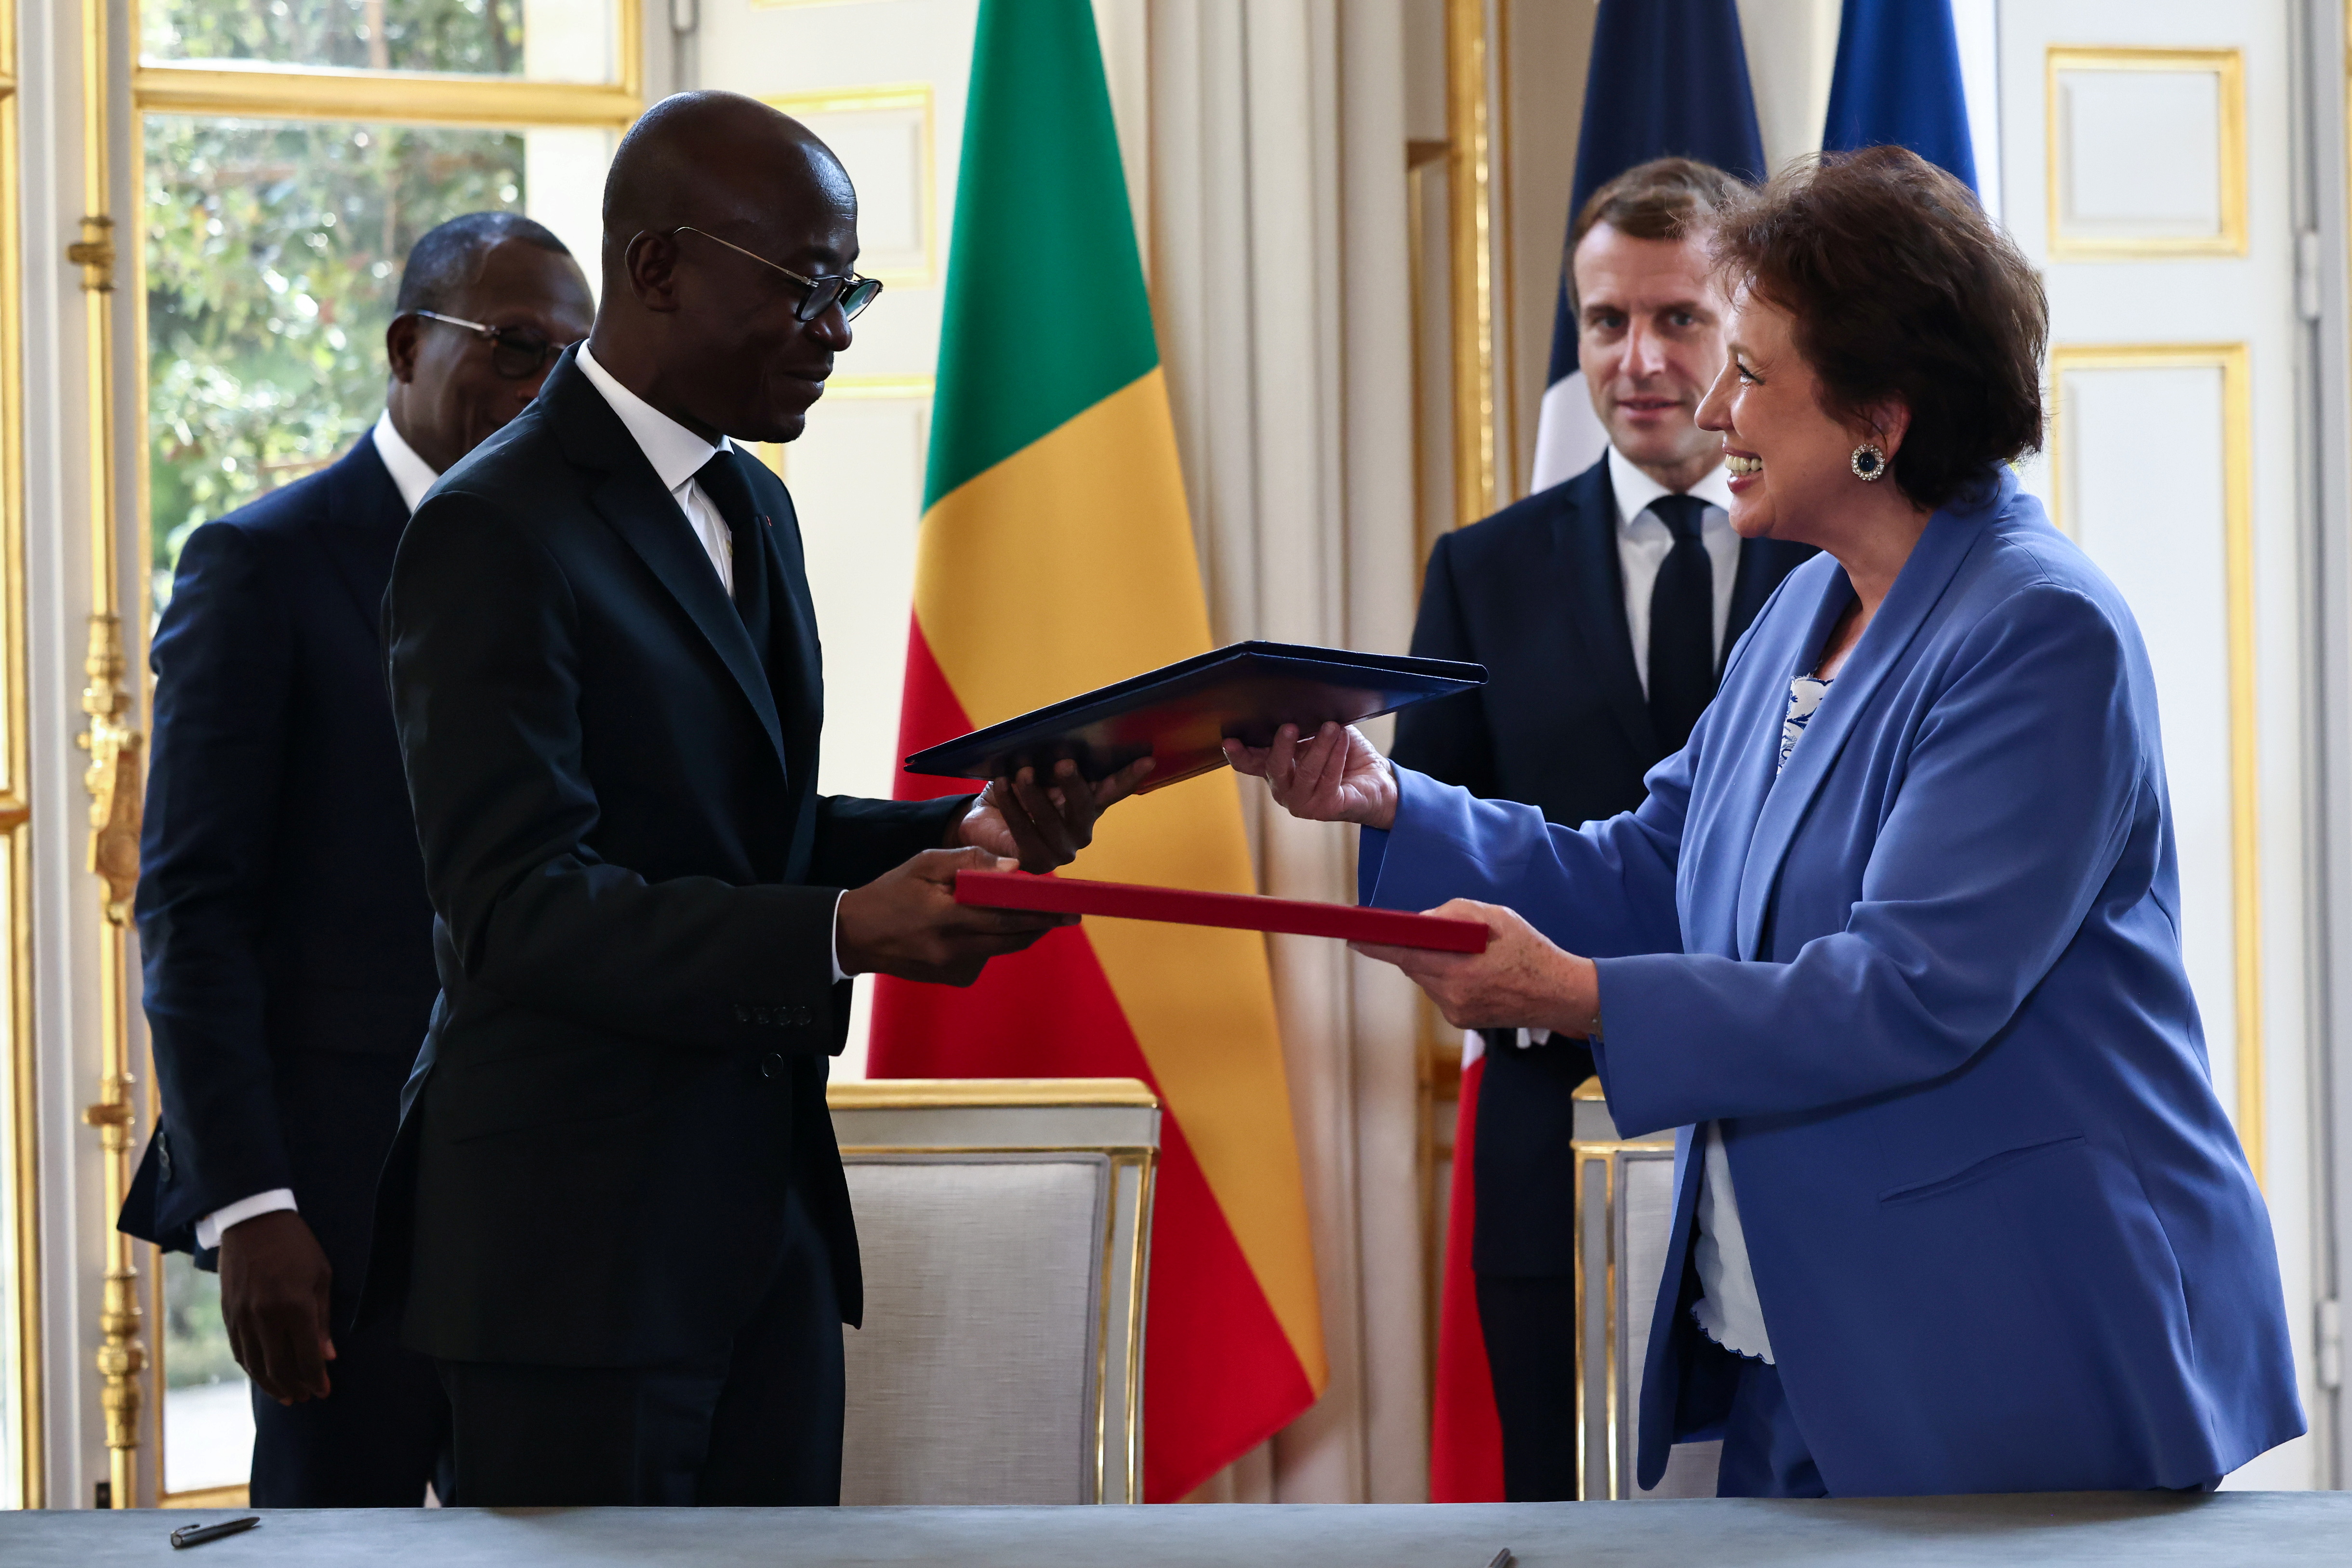 Signing of an agreement between France and Benin about the return of looted cultural artefacts